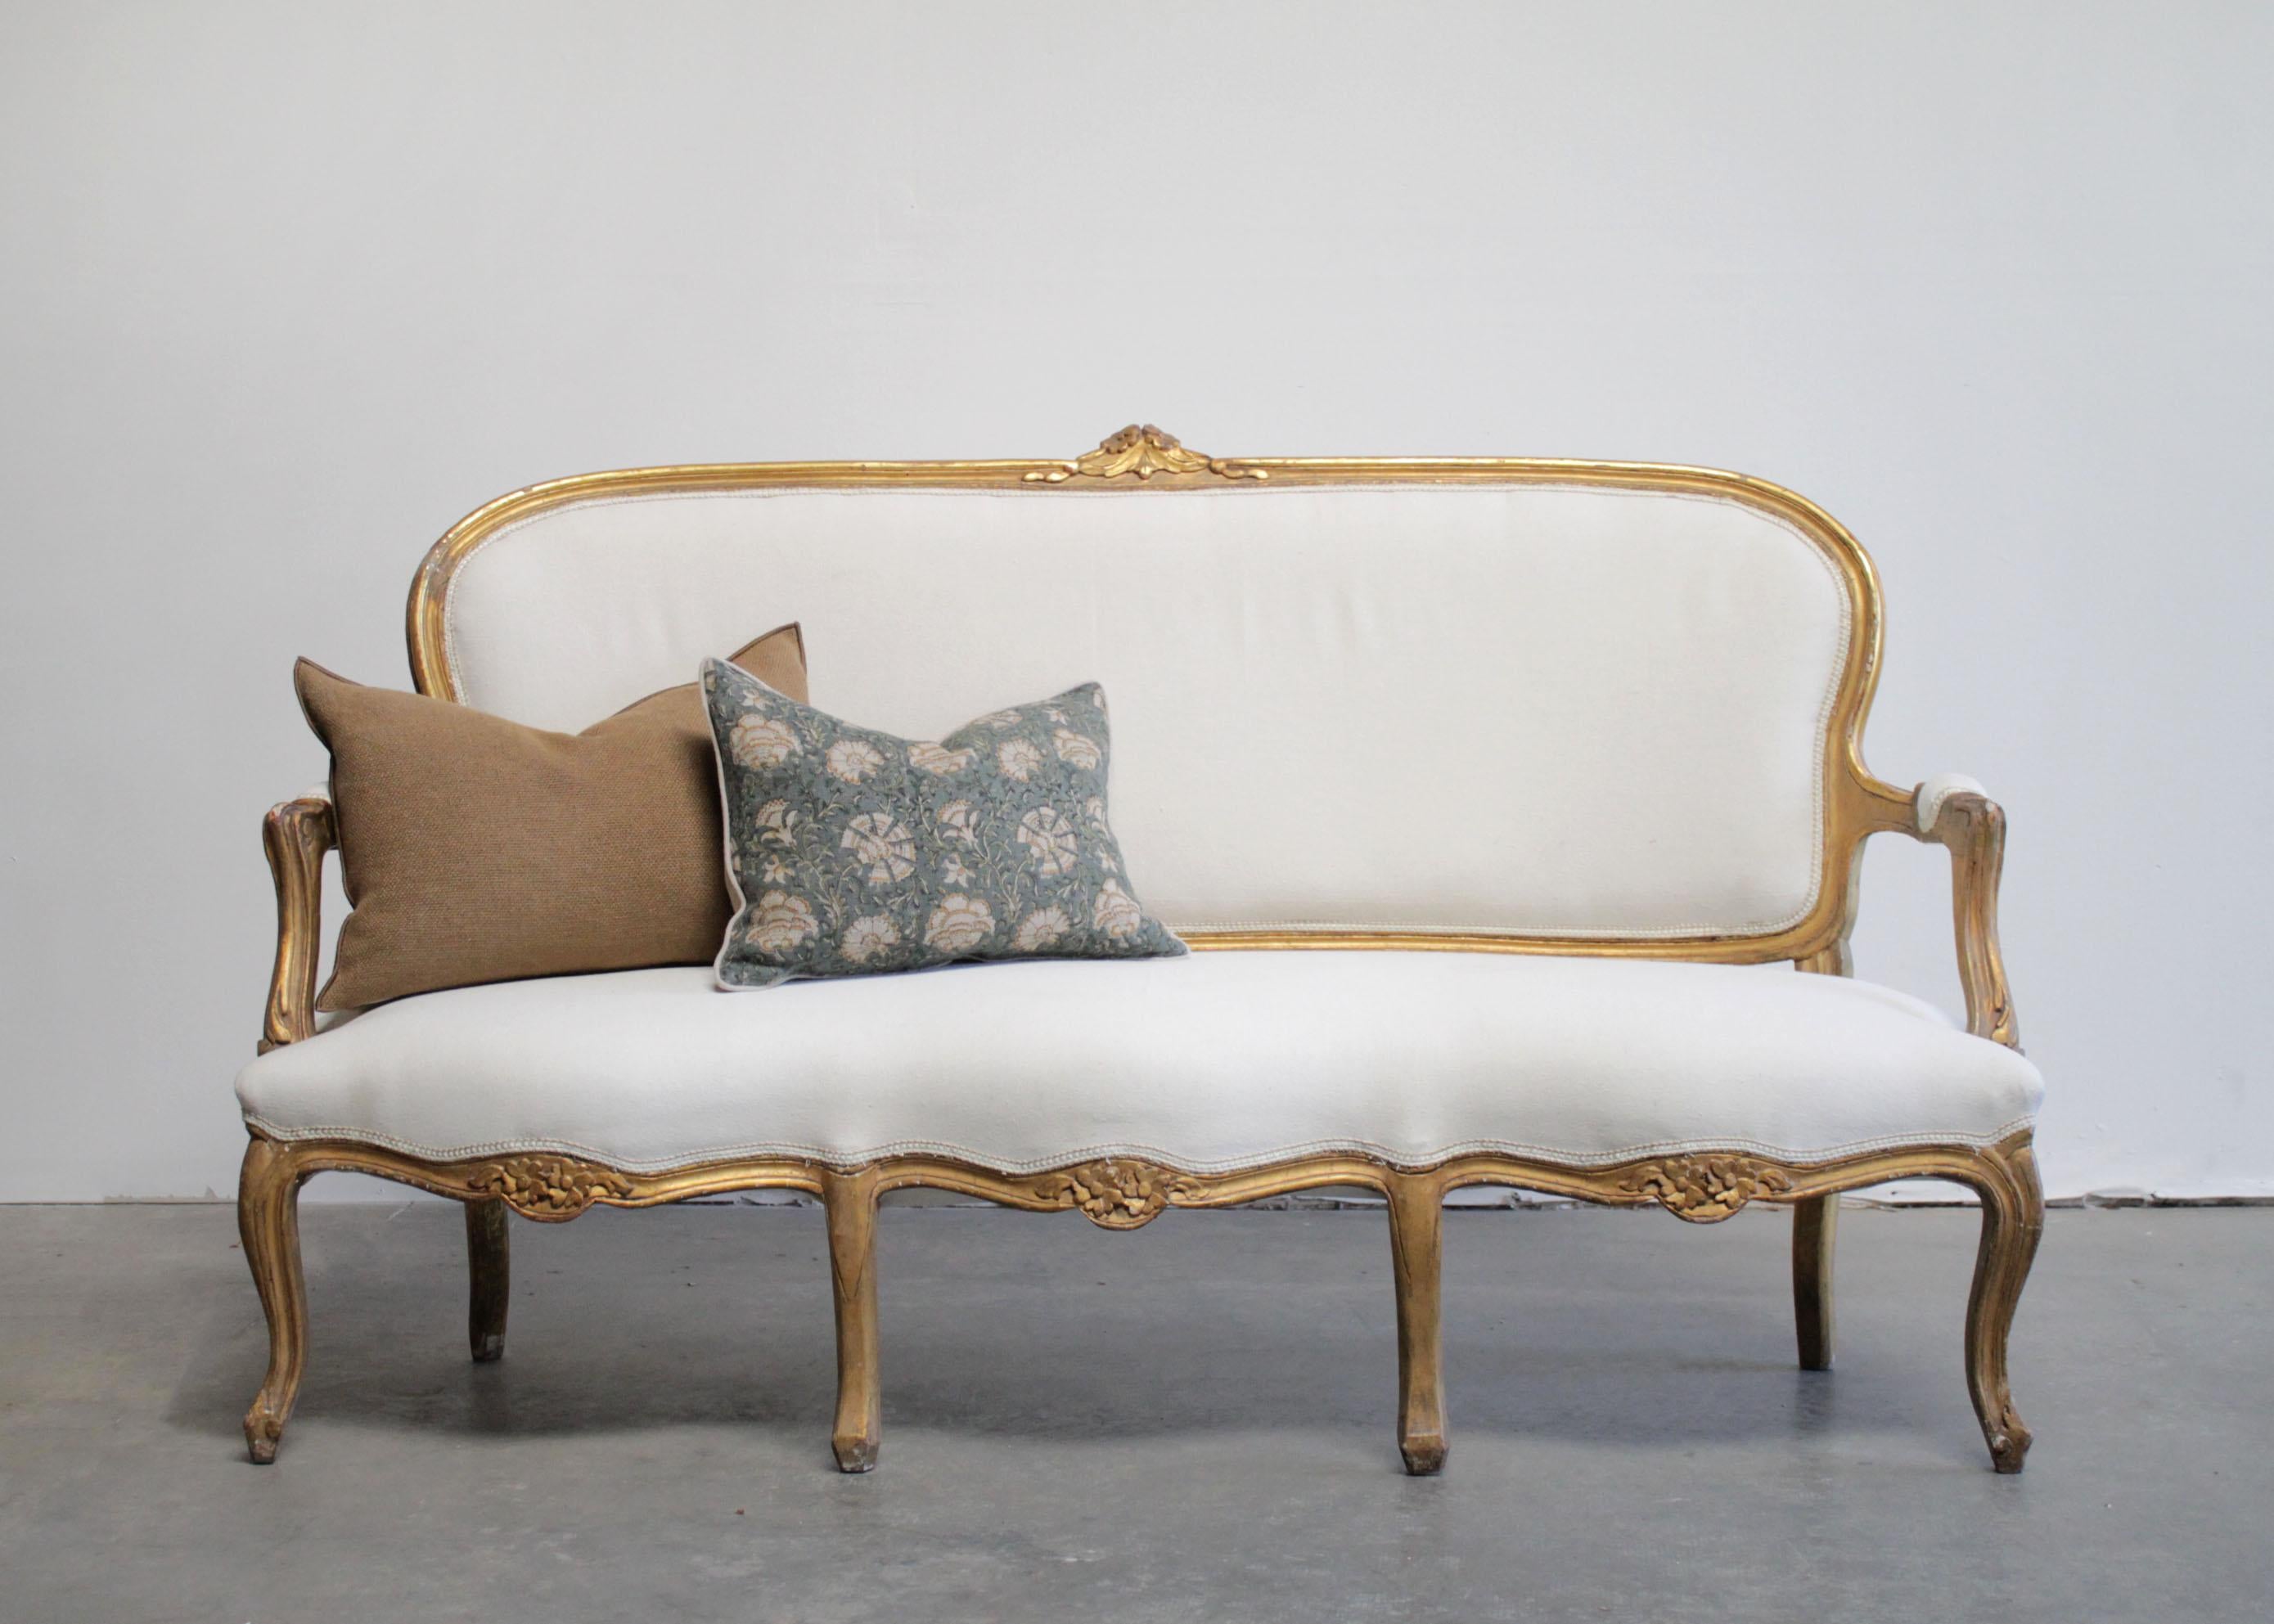 Vintage giltwood upholstered Louis XV style open arm sofa settee
Original gilt wood finish with subtle distressed edges, where gilt and wood show through.
Classic cabriole legs, with a floral carvings at the top.
Upholstered in a natural muslin